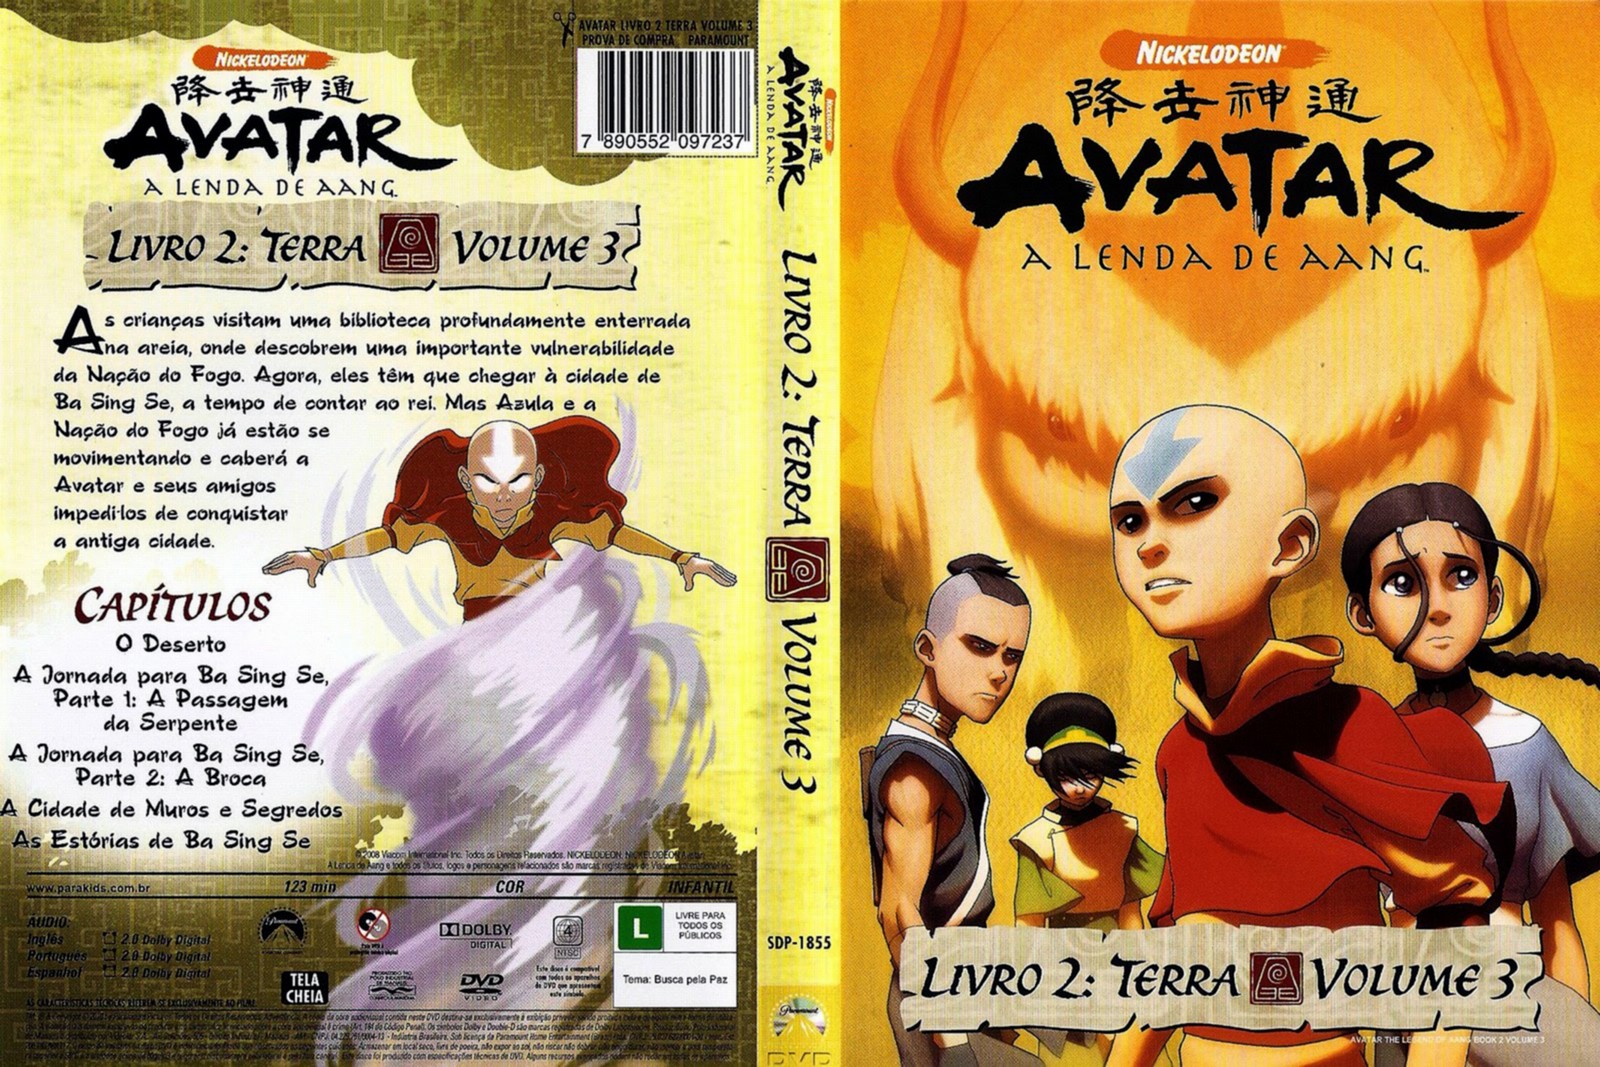 Avatar the last airbender in english. Никелодеон аватар аанг. Аватар DVD лицензия белая. Avatar 1-2 Cover DVD.